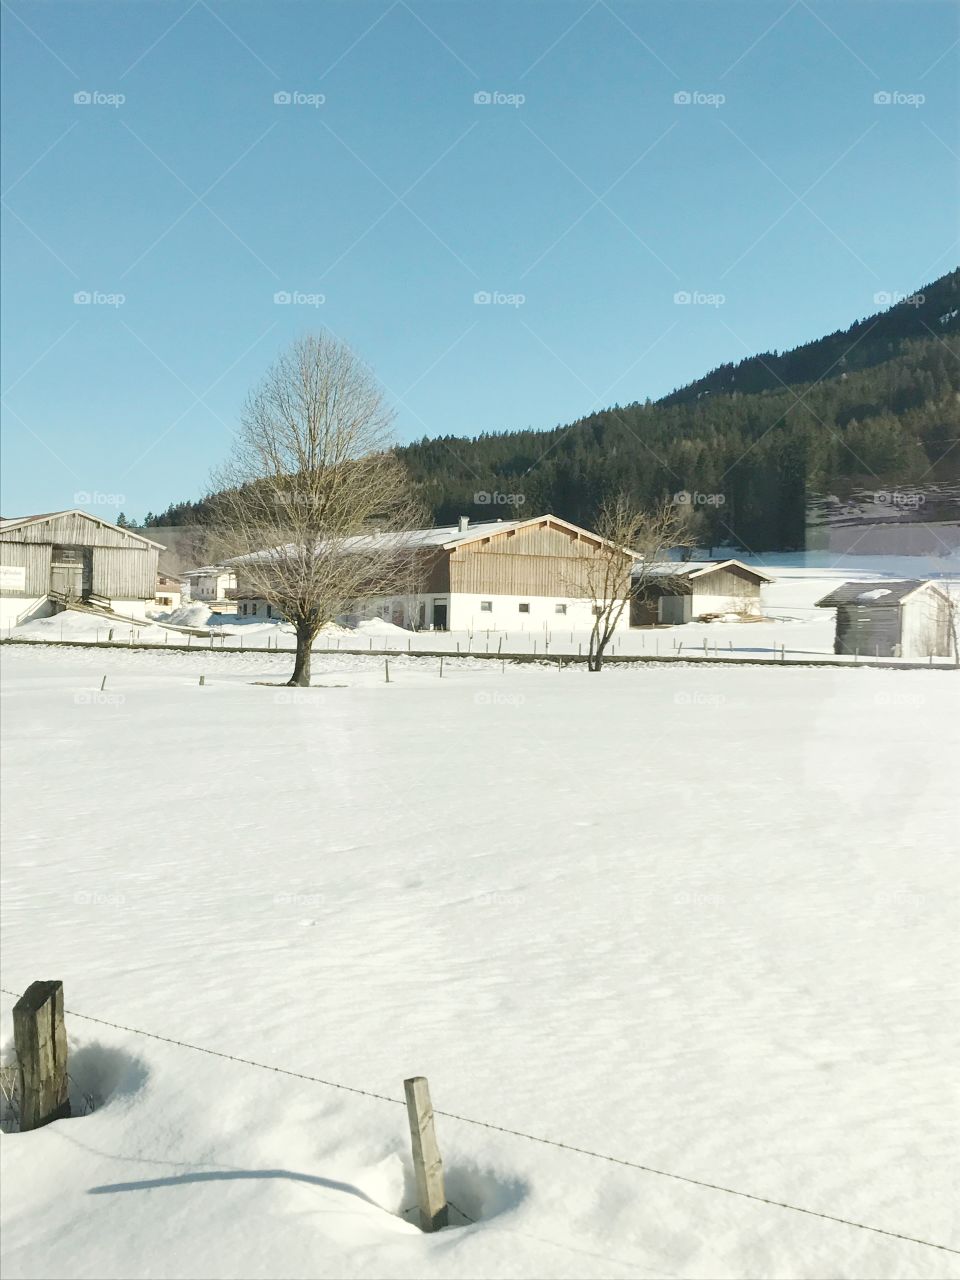 Wooden houses in snow in Austria 